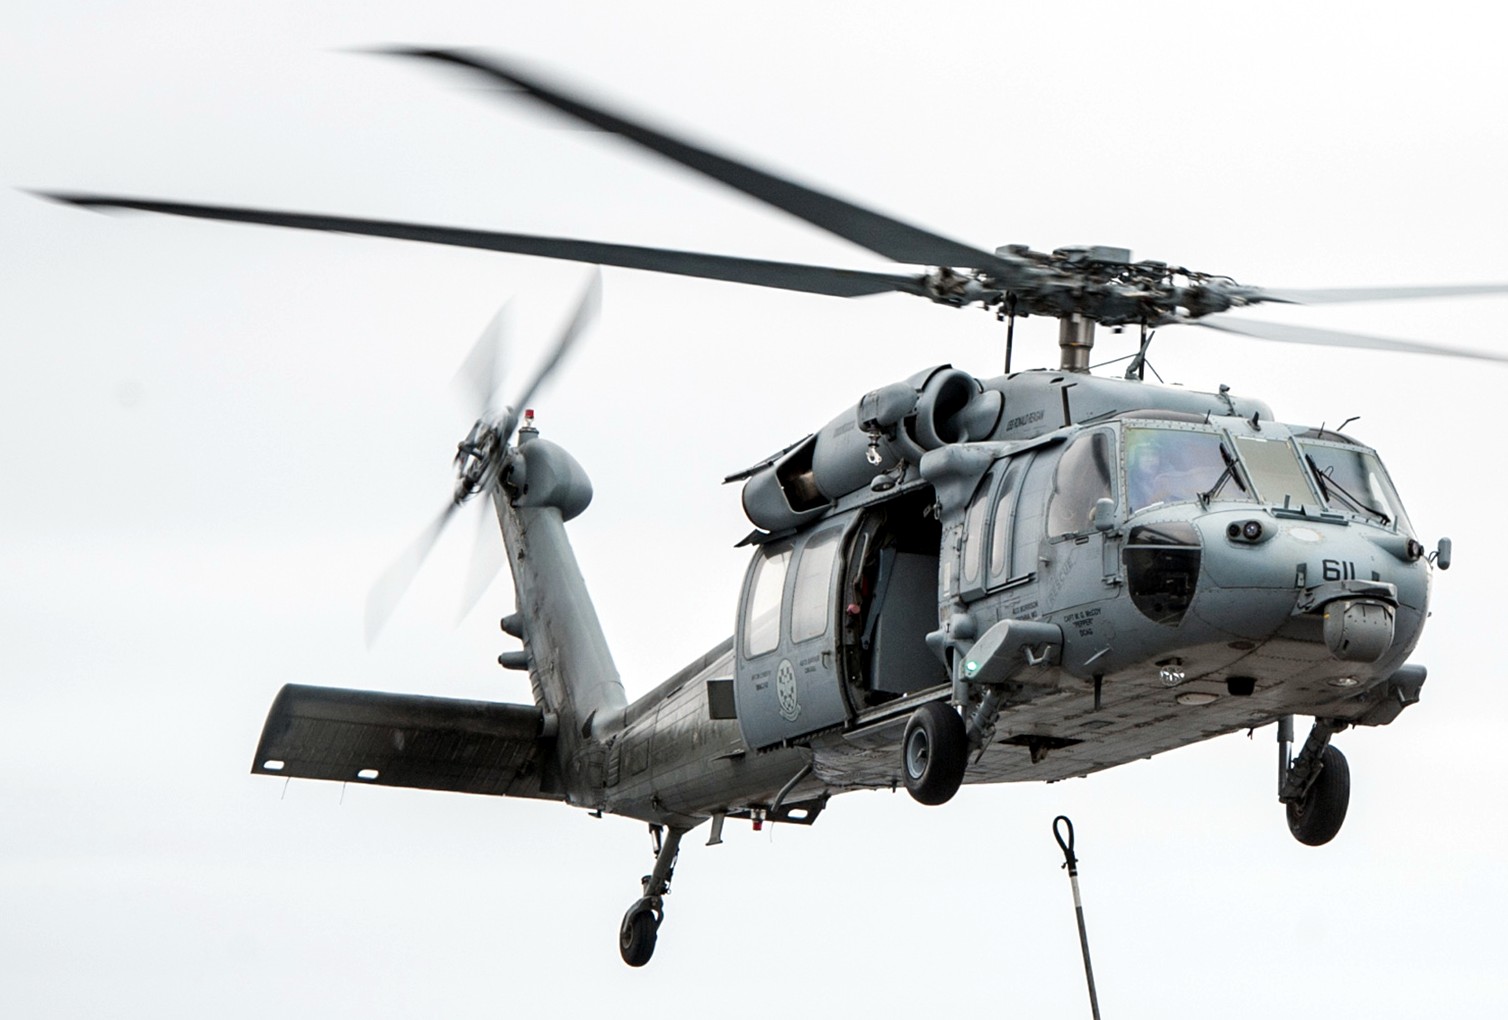 hsc-4 black knights helicopter sea combat squadron us navy mh-60s seahawk 2015 24